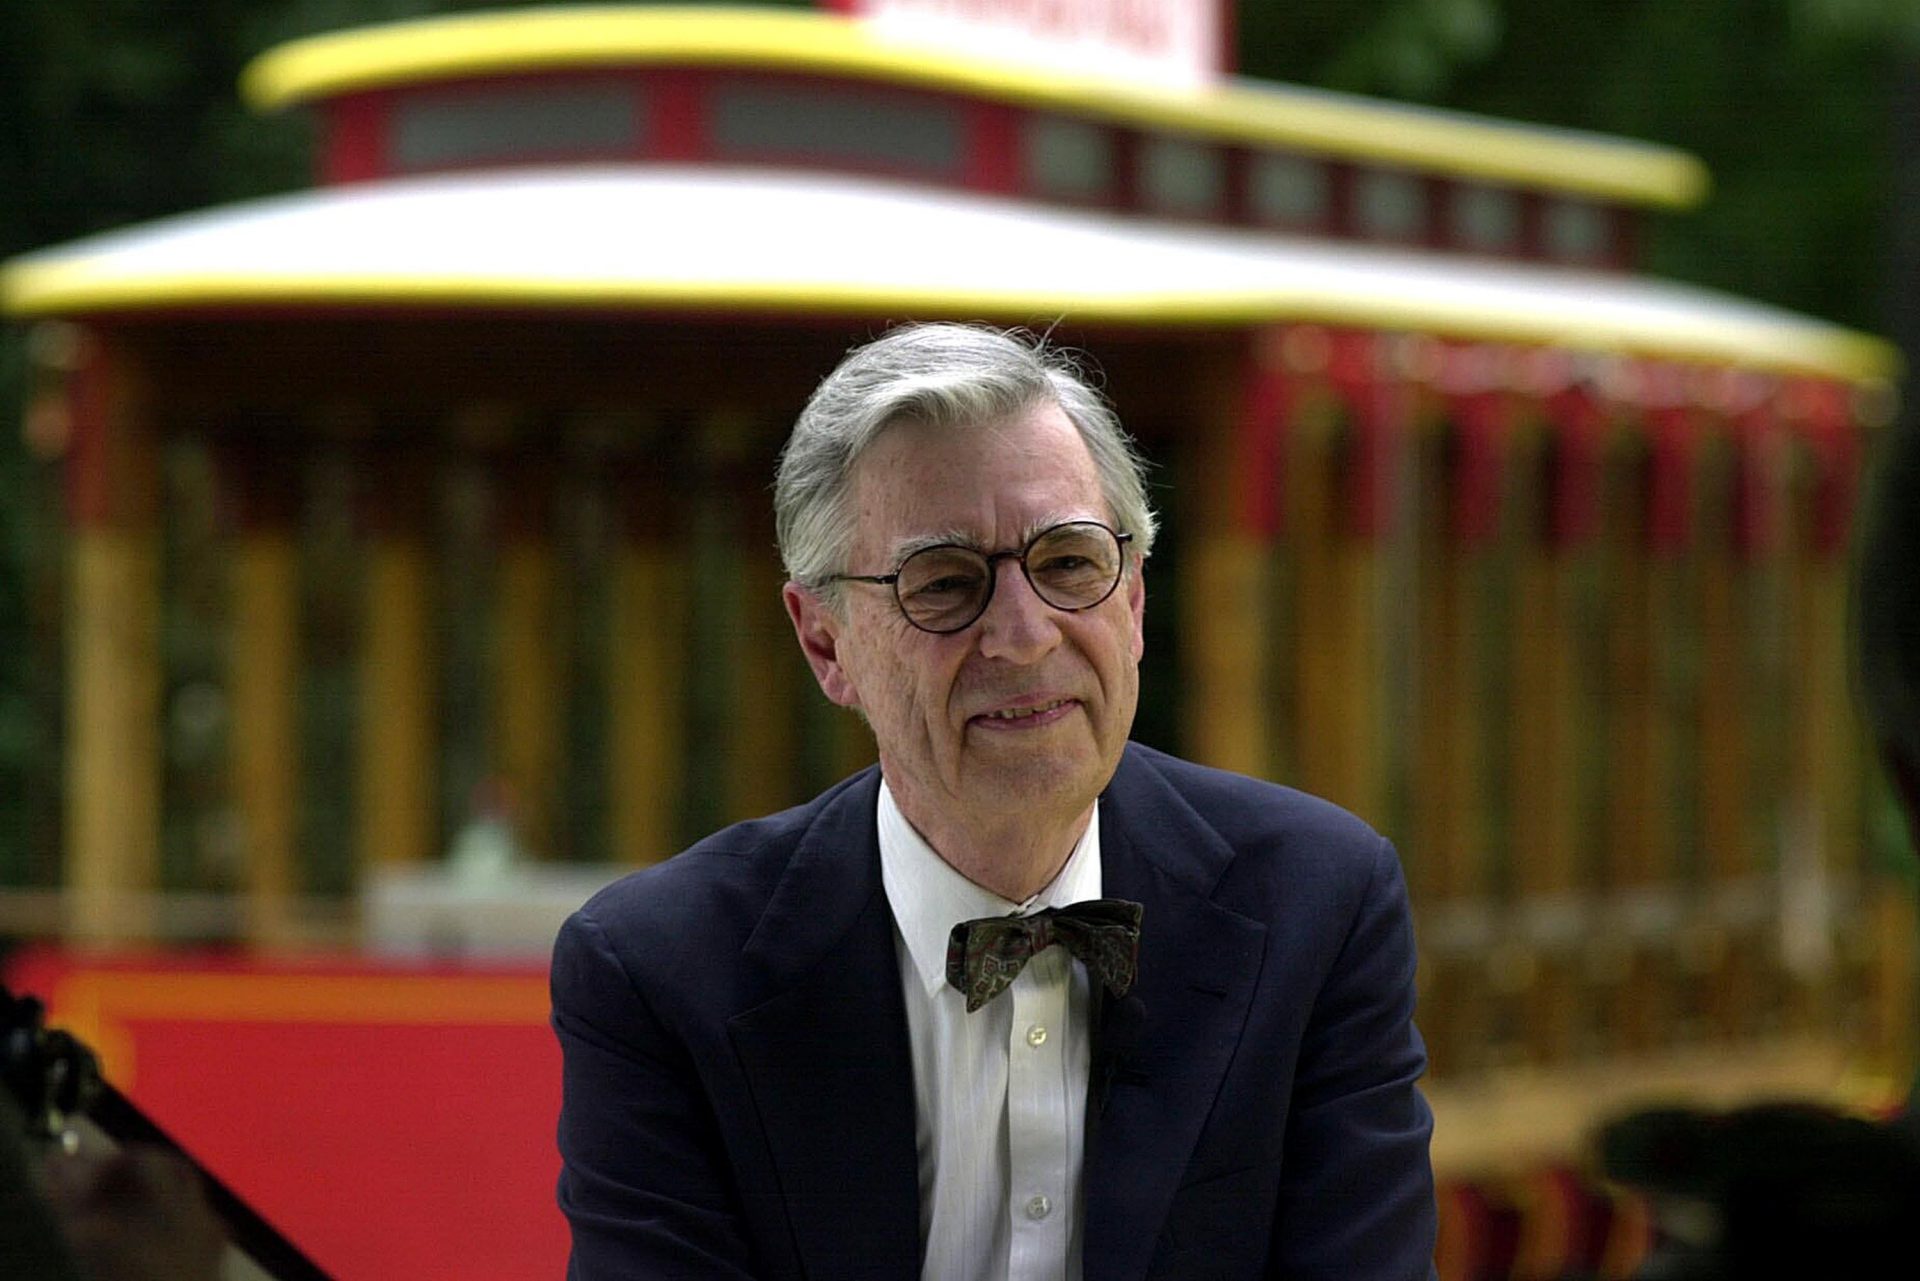 This July 12, 2000 file photo shows Fred Rogers being interviewed in front of the Mister Roger's Neighborhood Trolley attraction at Idlewild Park, in Ligonier, Pa.